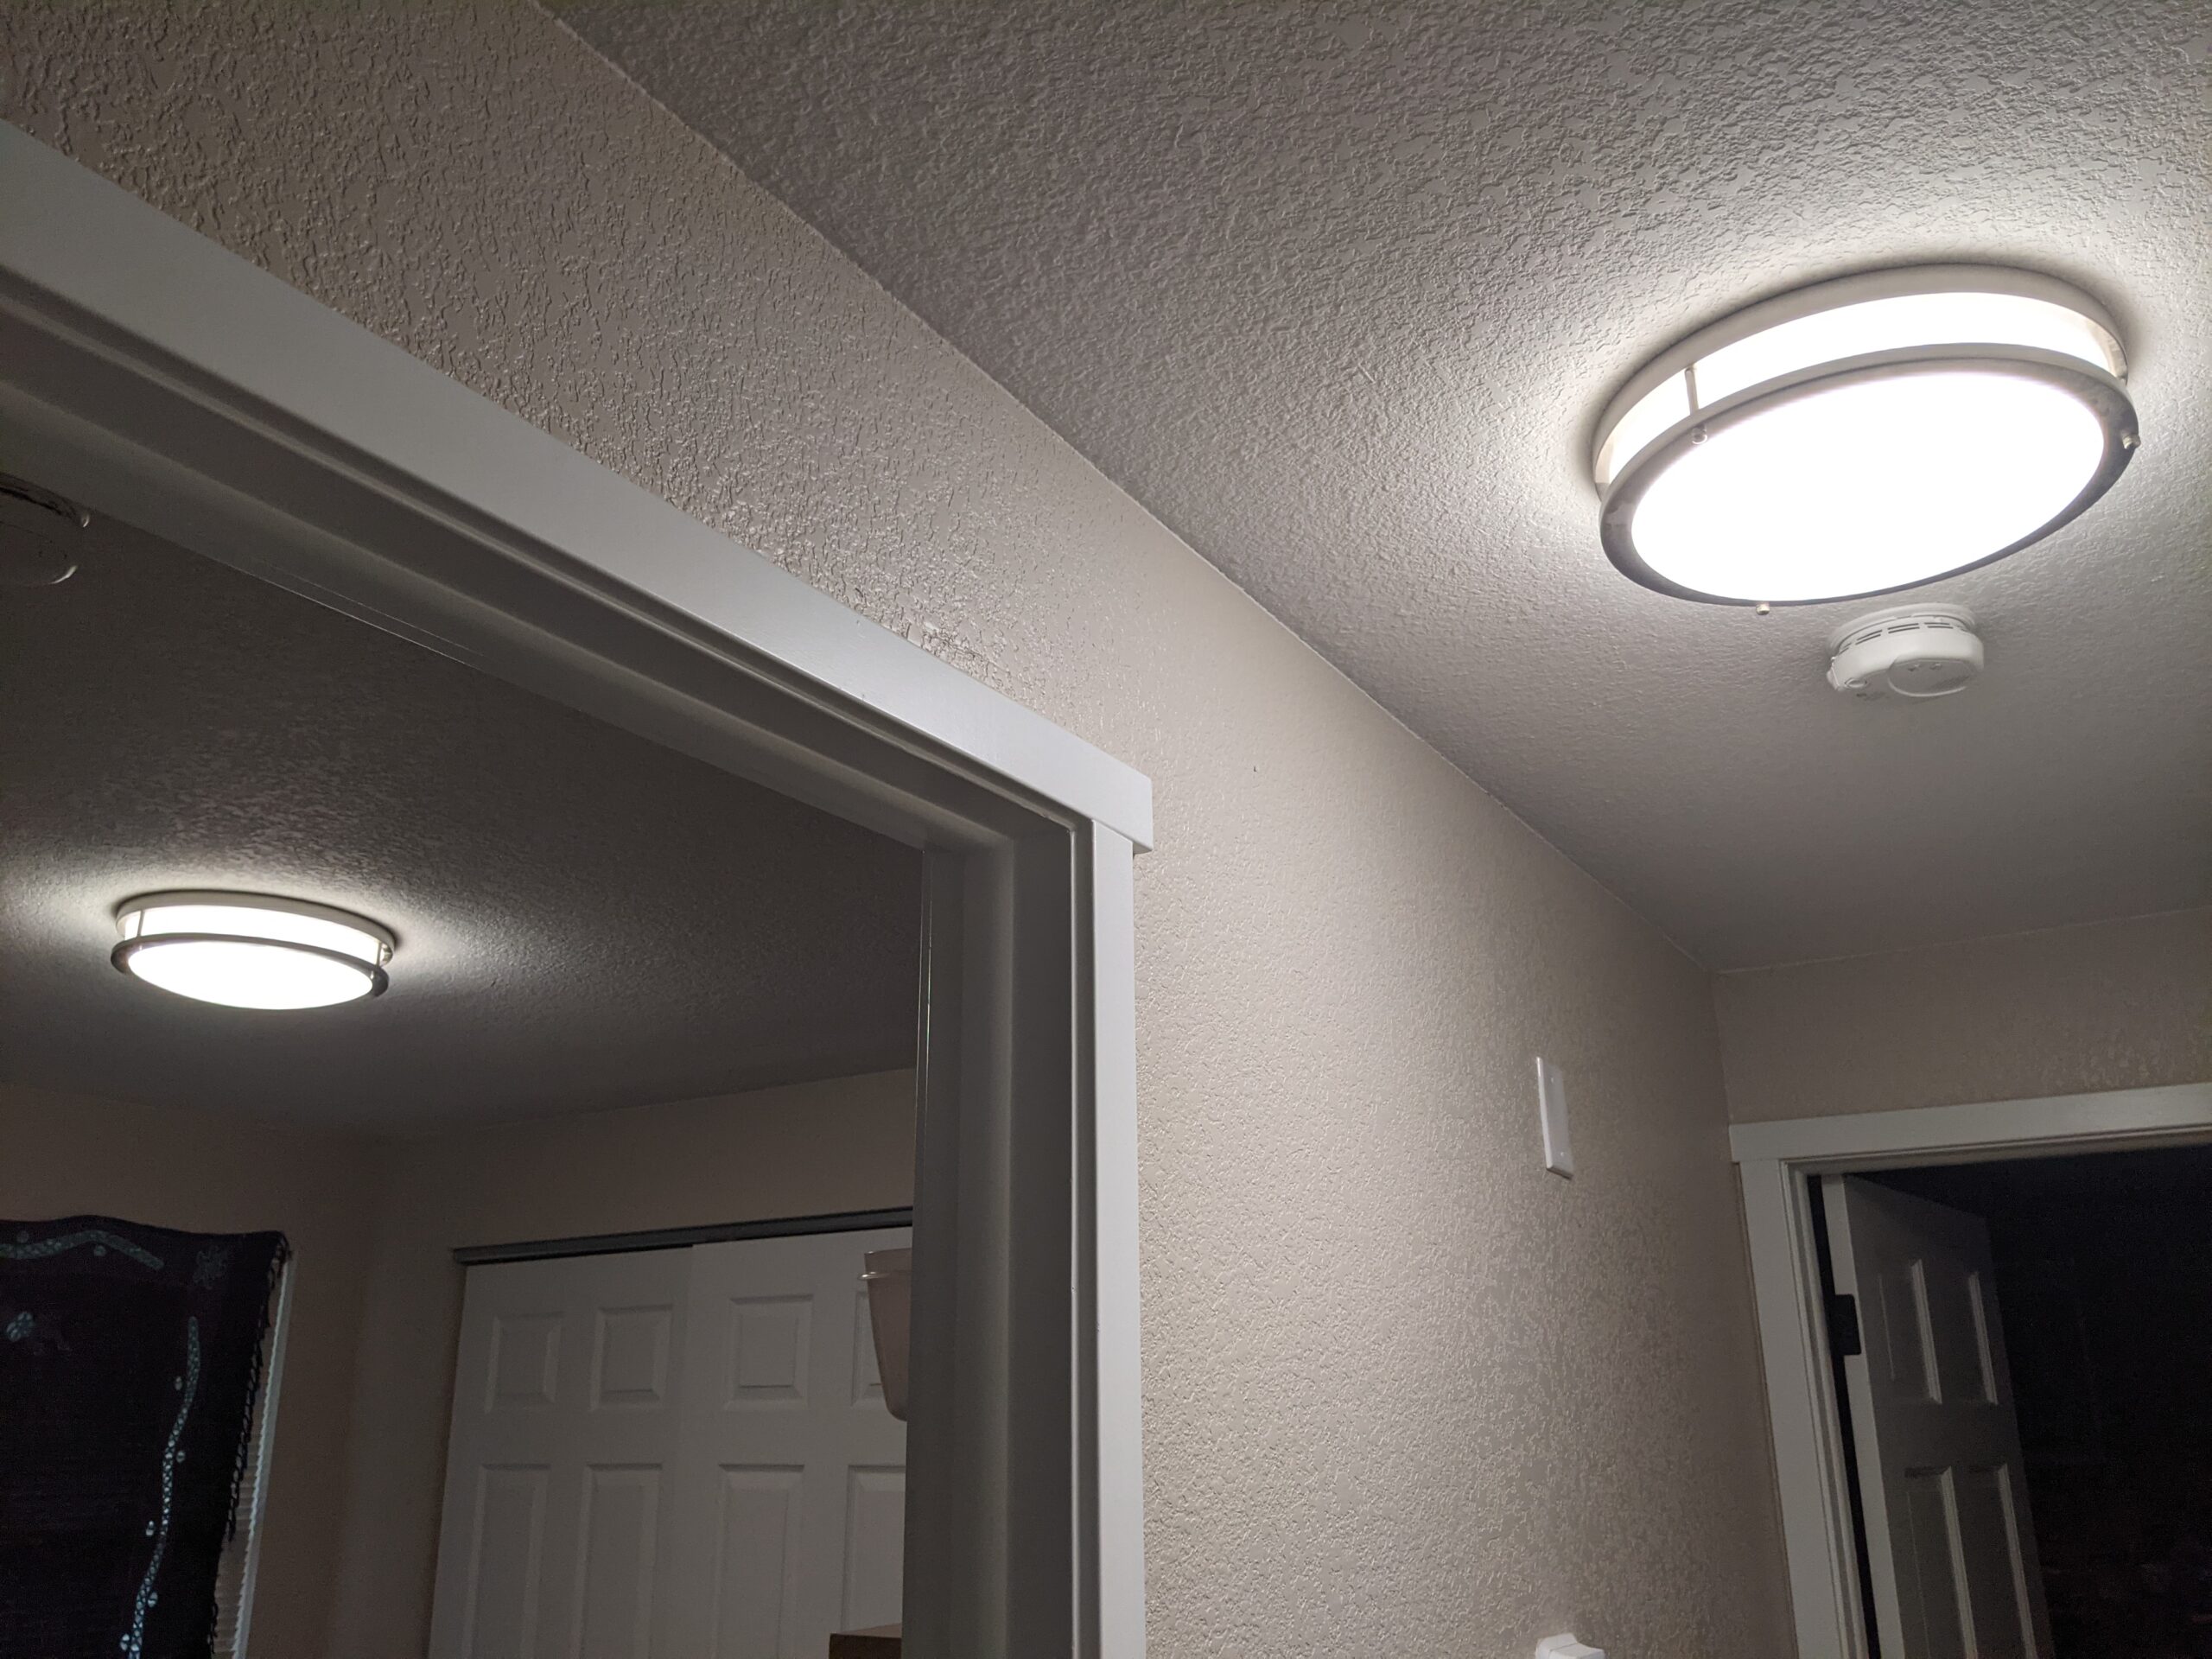 AFTER These new LED lights worked great, so we reused them when we remodeled our first home.